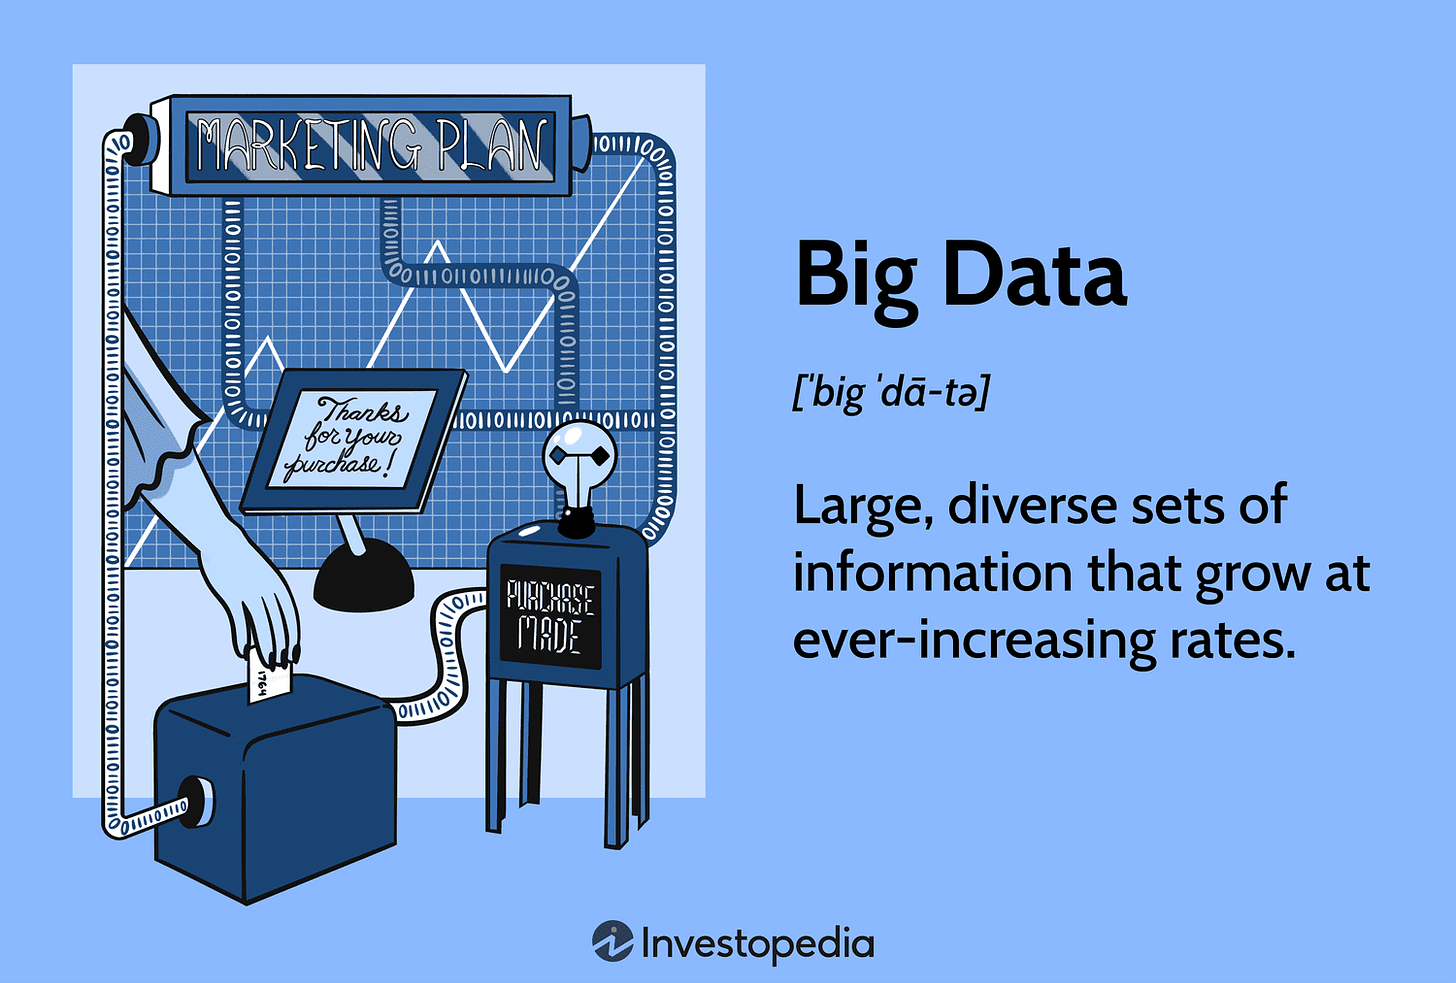 What Is Big Data? Definition, How It Works, and Uses